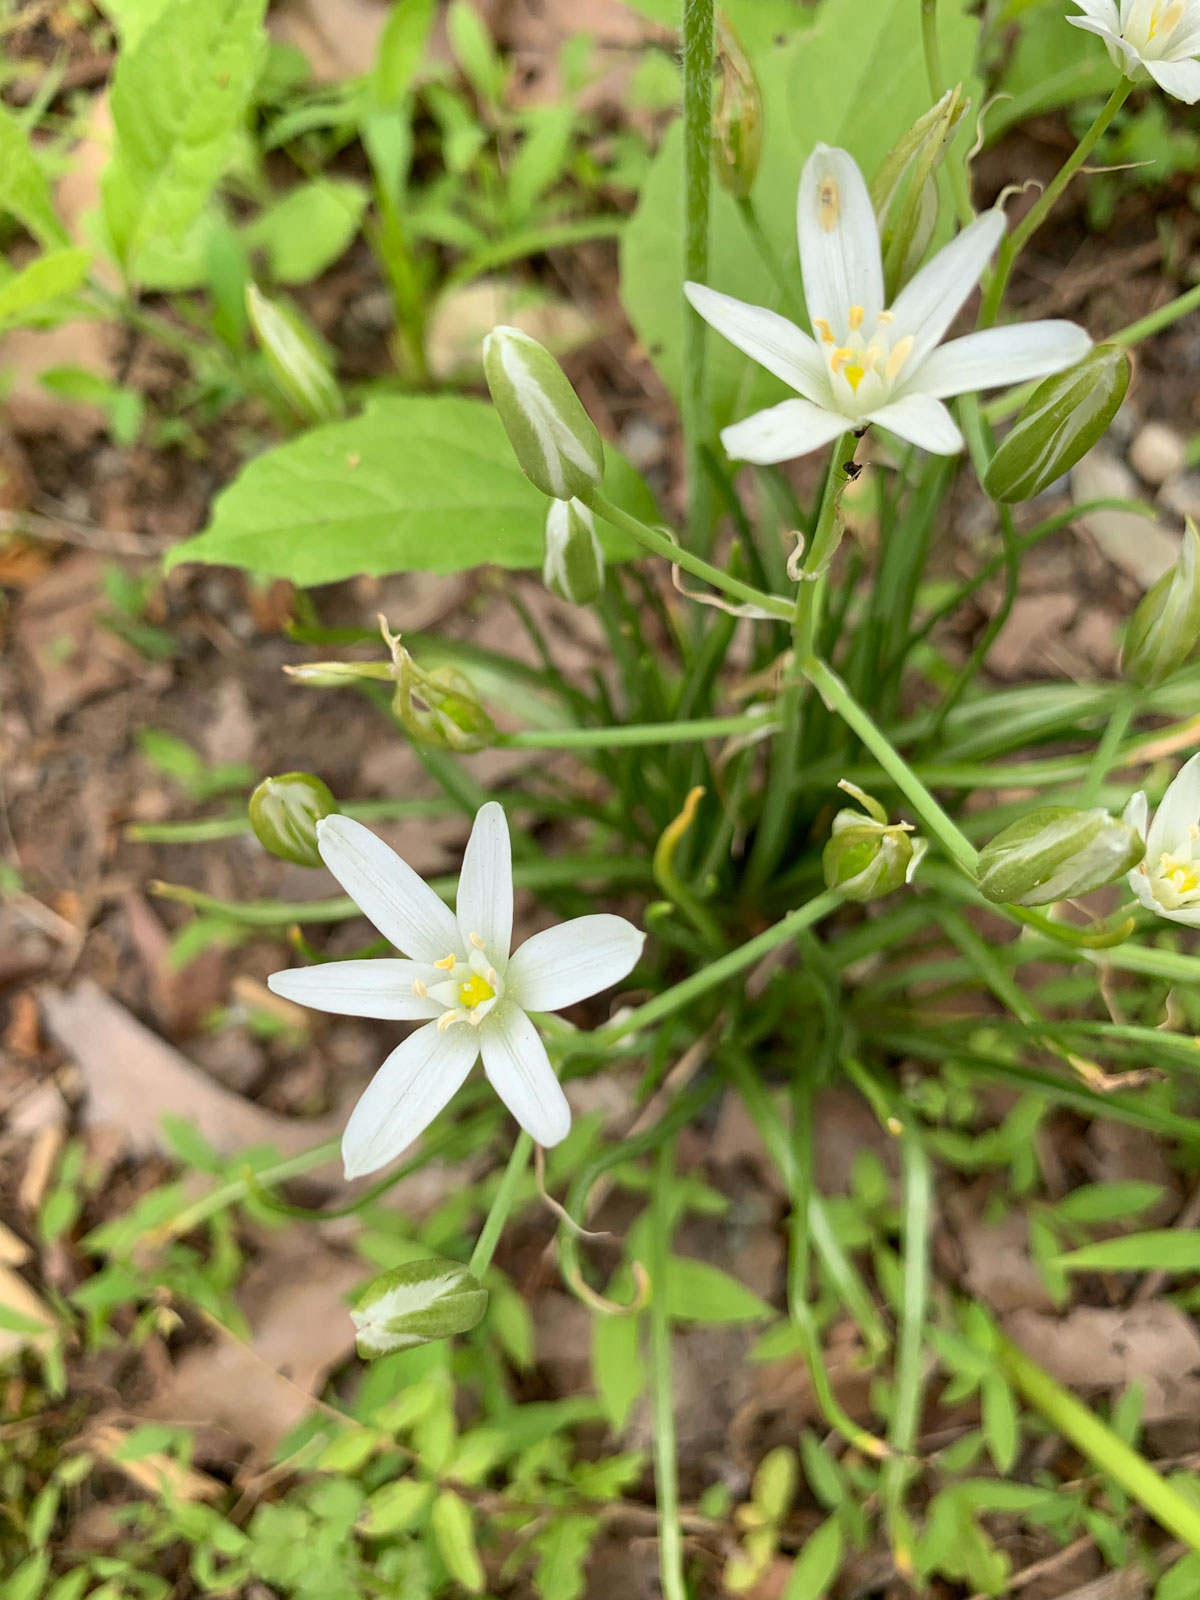 Small white flowers with yellow center